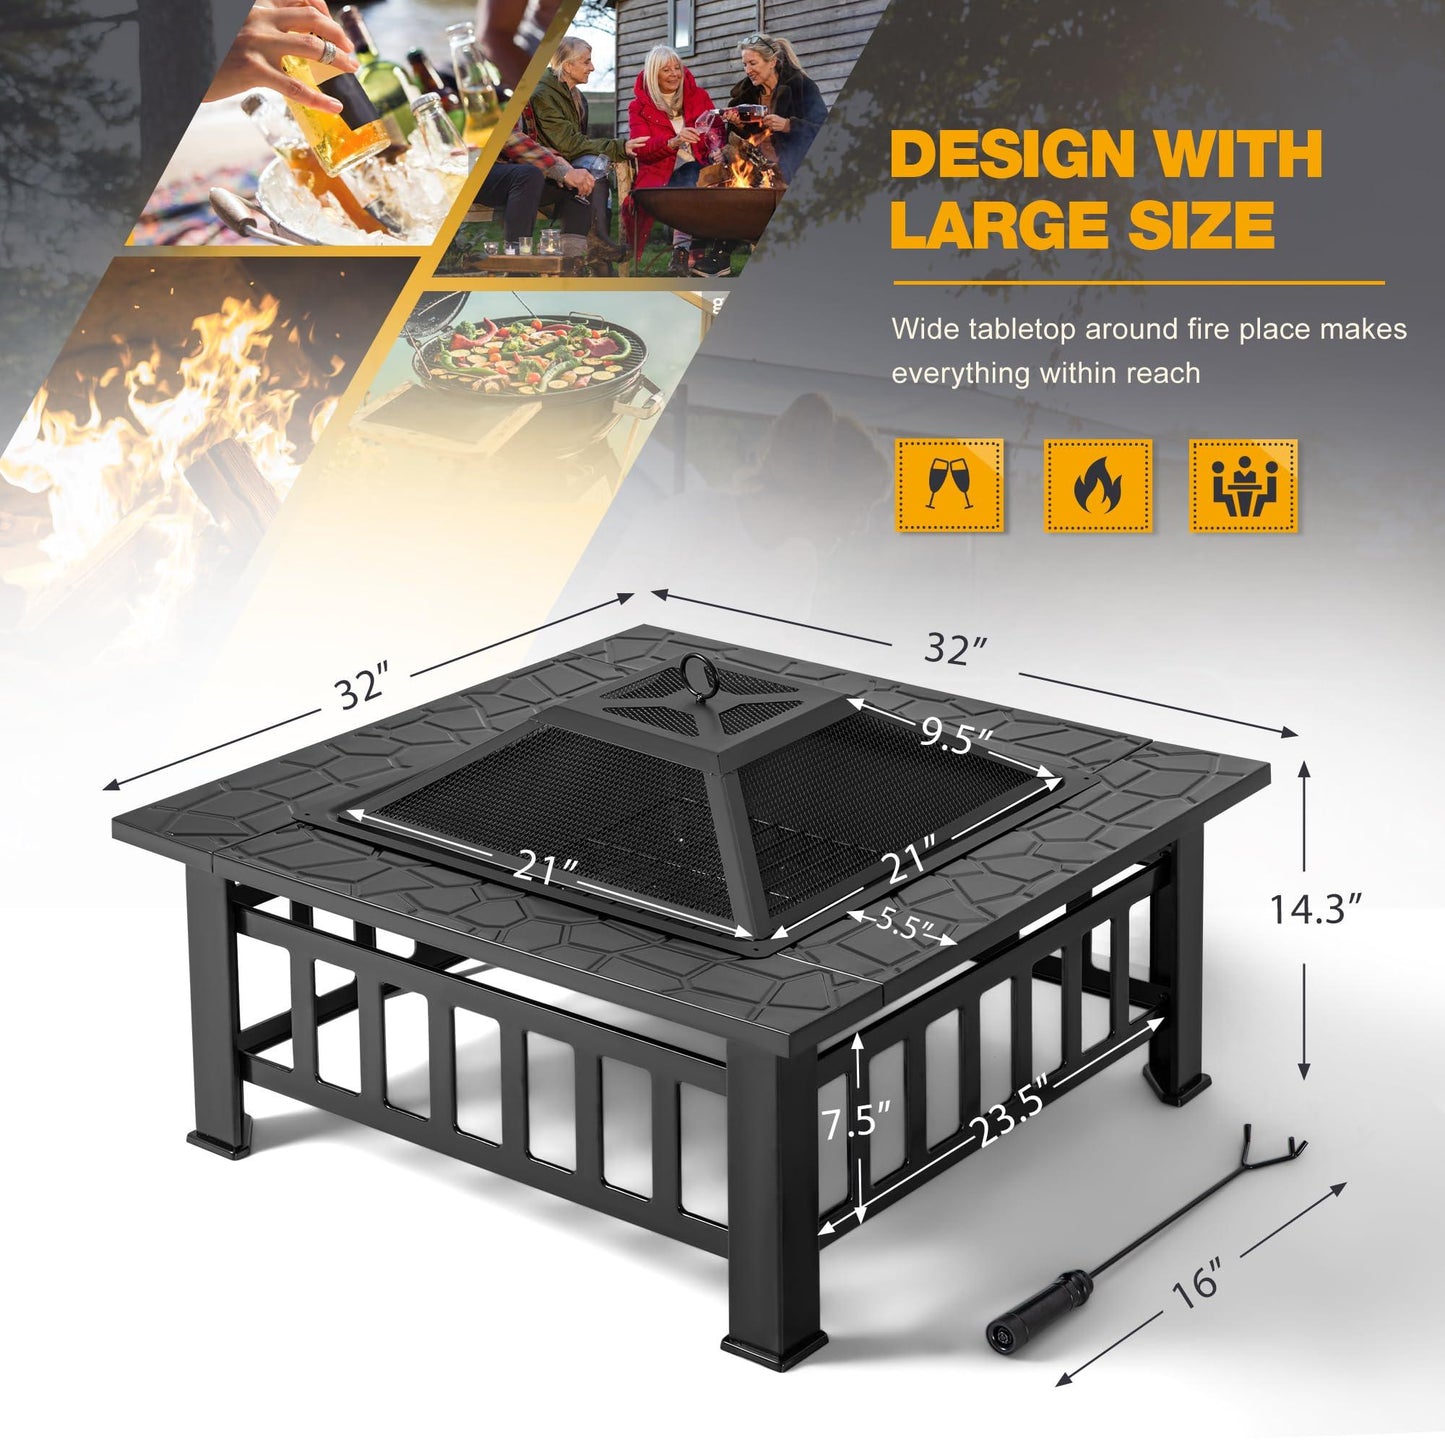 Devoko 32 inch Metal Outdoor Fire Pit Table Multiuse Square Patio BBQ Firepit with Spark Screen Lid and Waterproof Cover for Camping, Outside Wood Burning and Picnic Black - CookCave